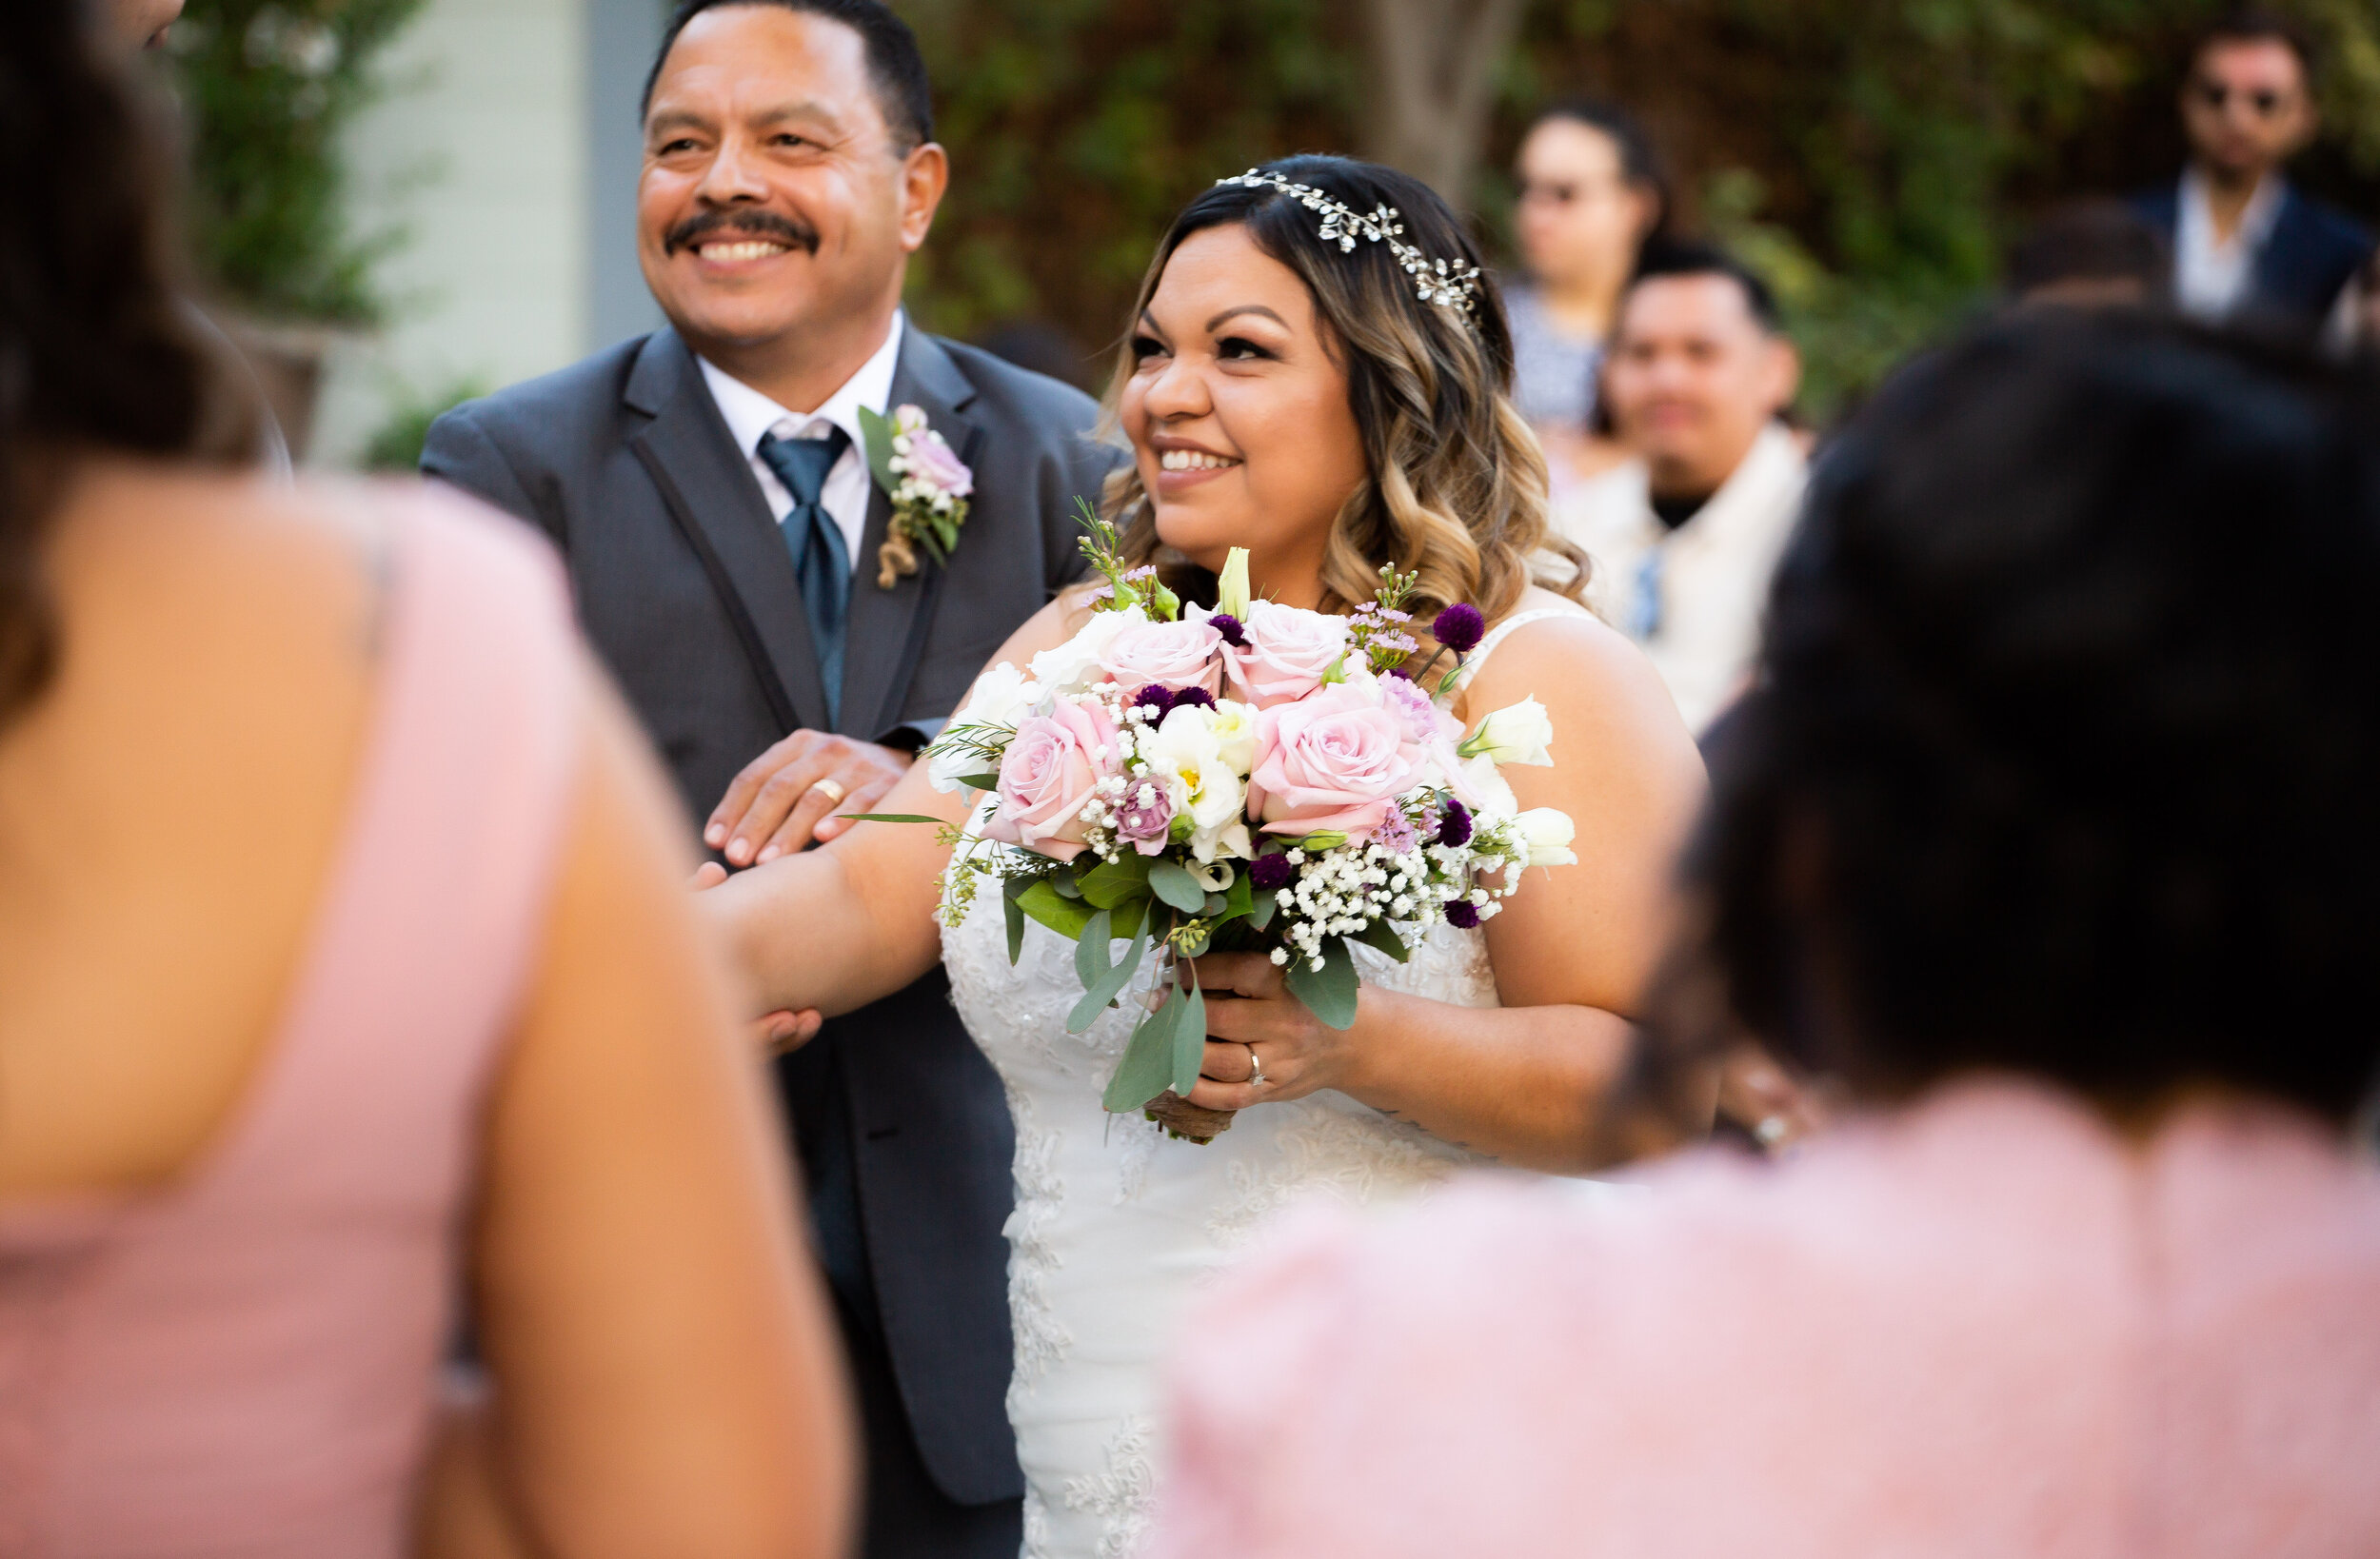 Kingsburg Wedding Photography - The Branch and Vine - The Clausen Gallery -17.jpg